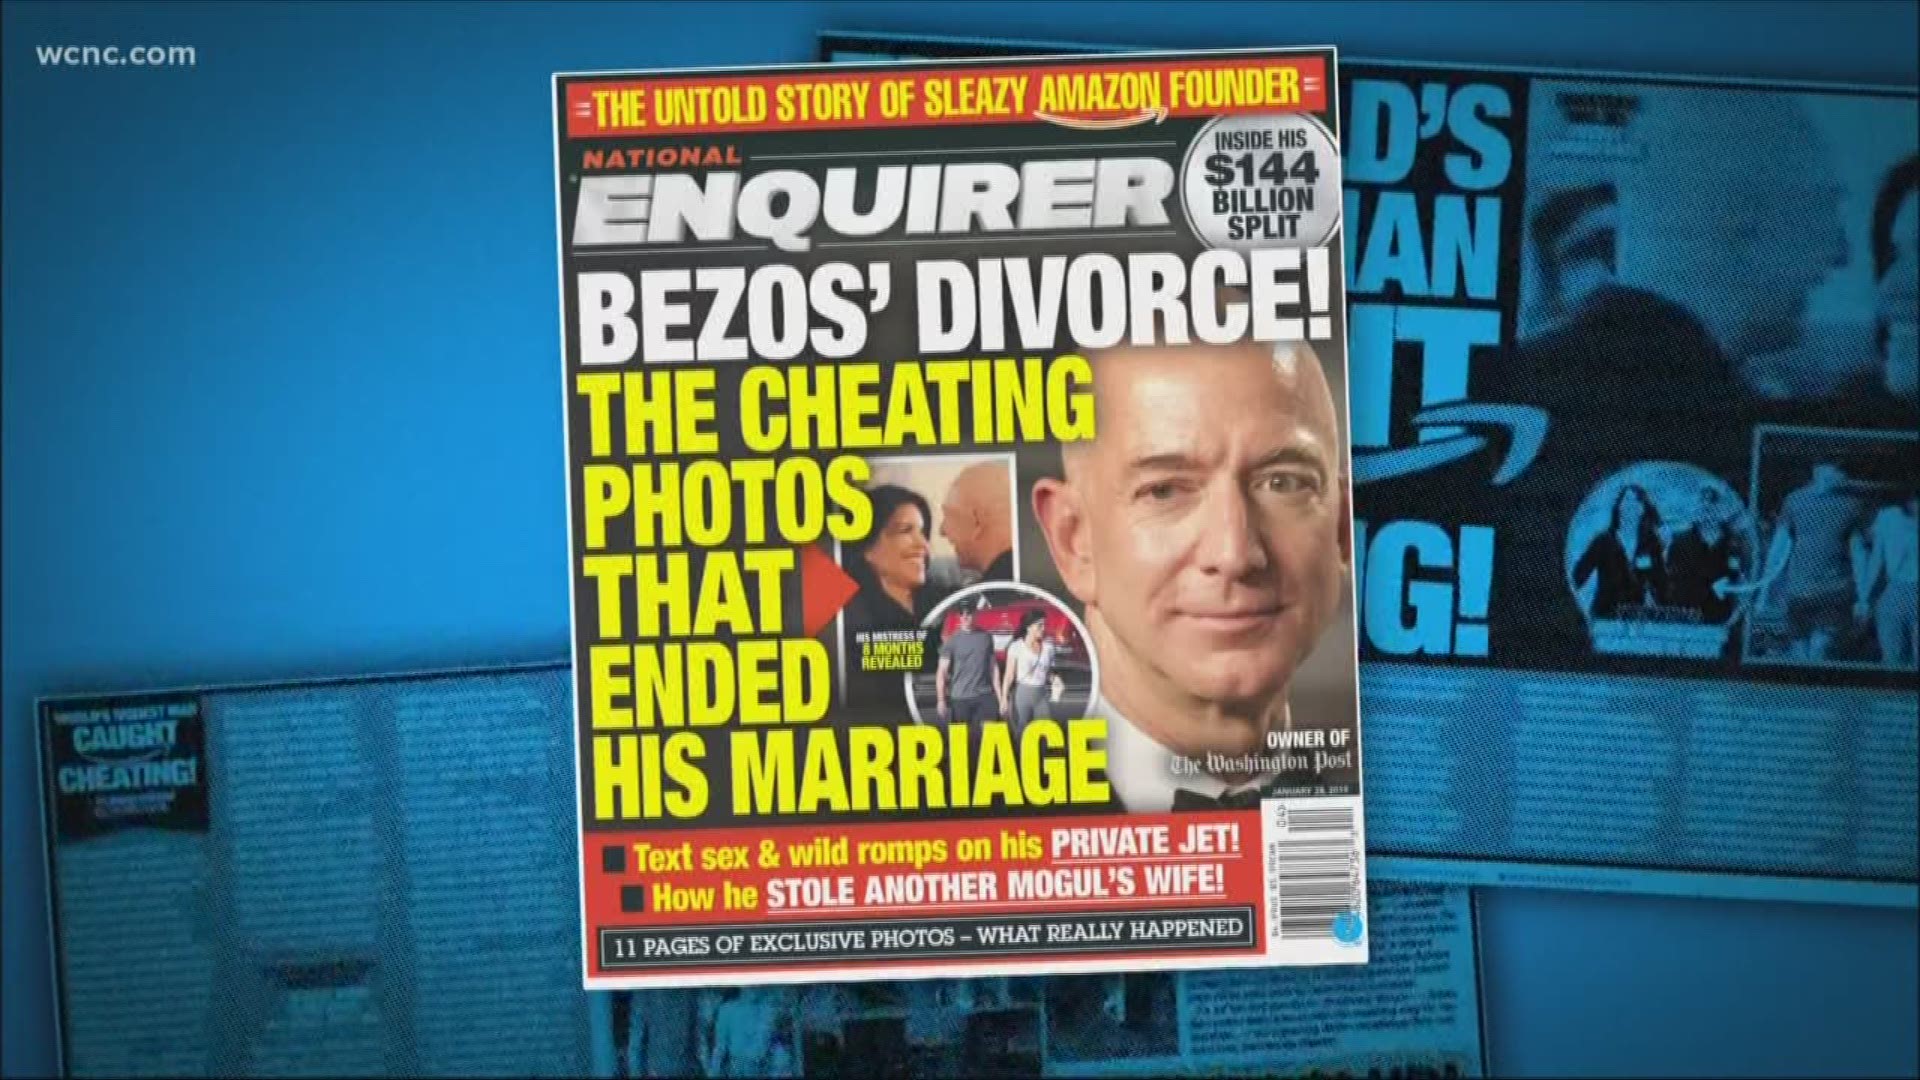 Jeff Bezos accuses National Enquirer of blackmail wcnc